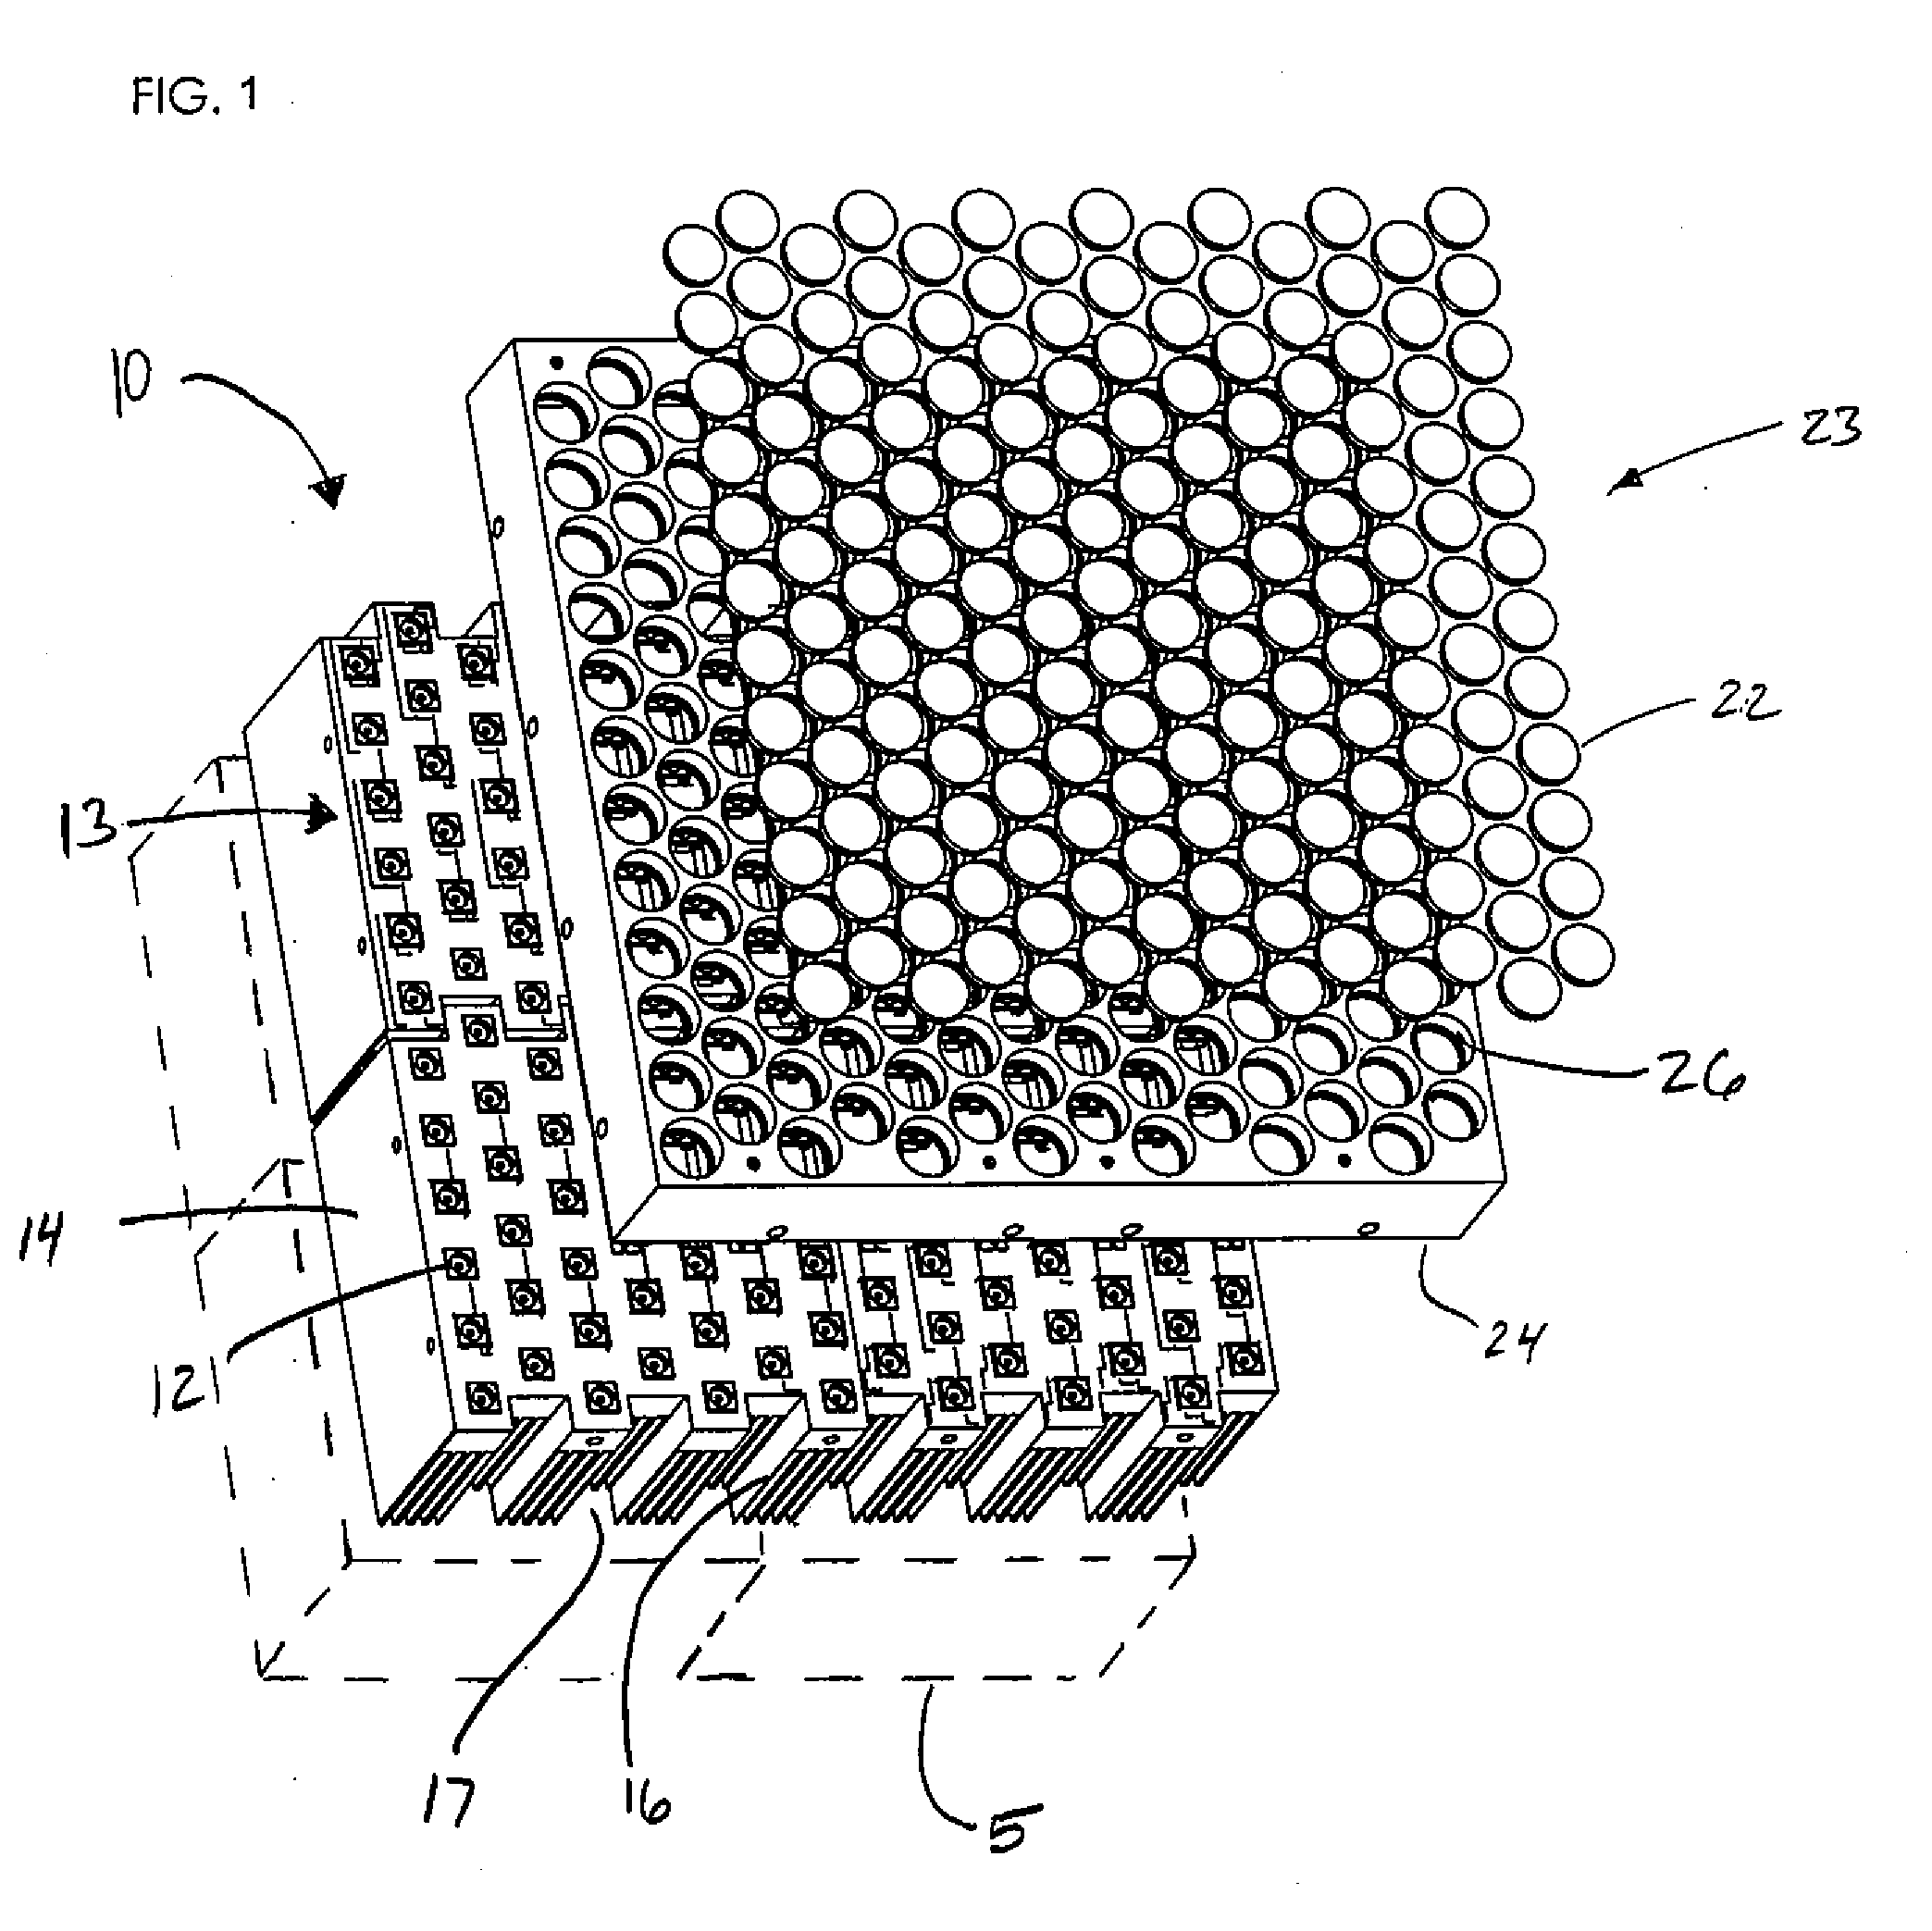 Ultraviolet light-emitting diode exposure apparatus for microfabrication